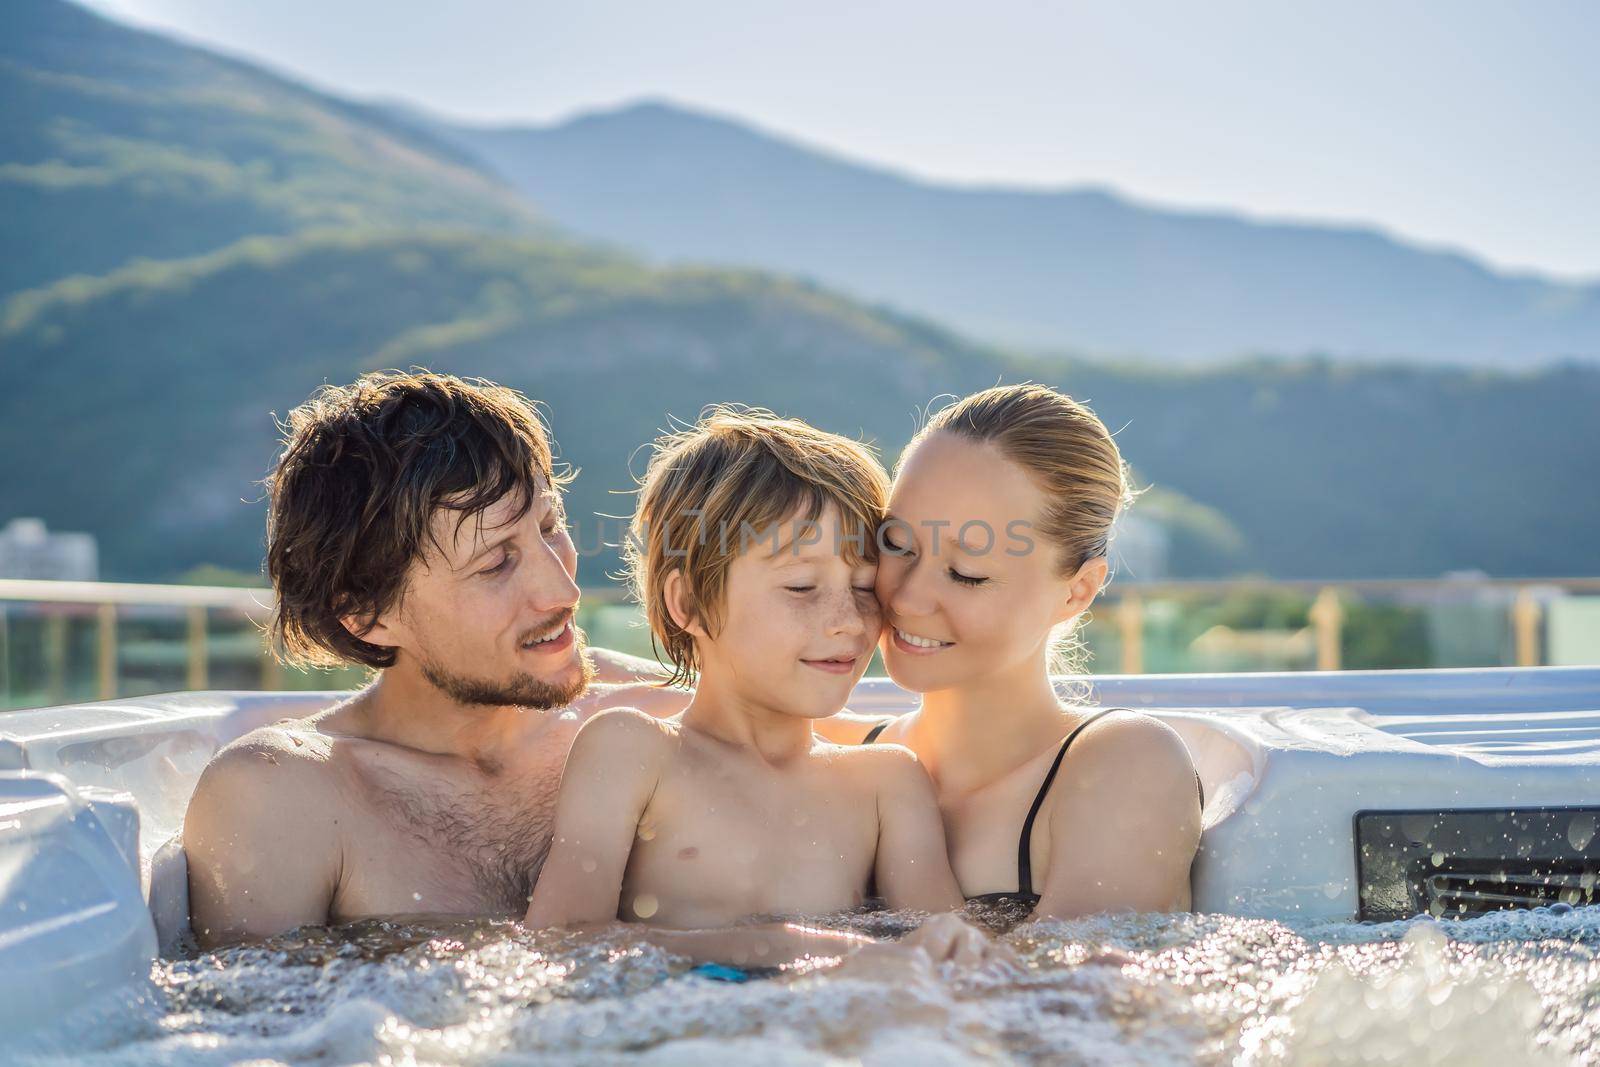 Portrait of young carefree happy smiling happy family relaxing at hot tub during enjoying happy traveling moment vacation. Life against the background of green big mountains.